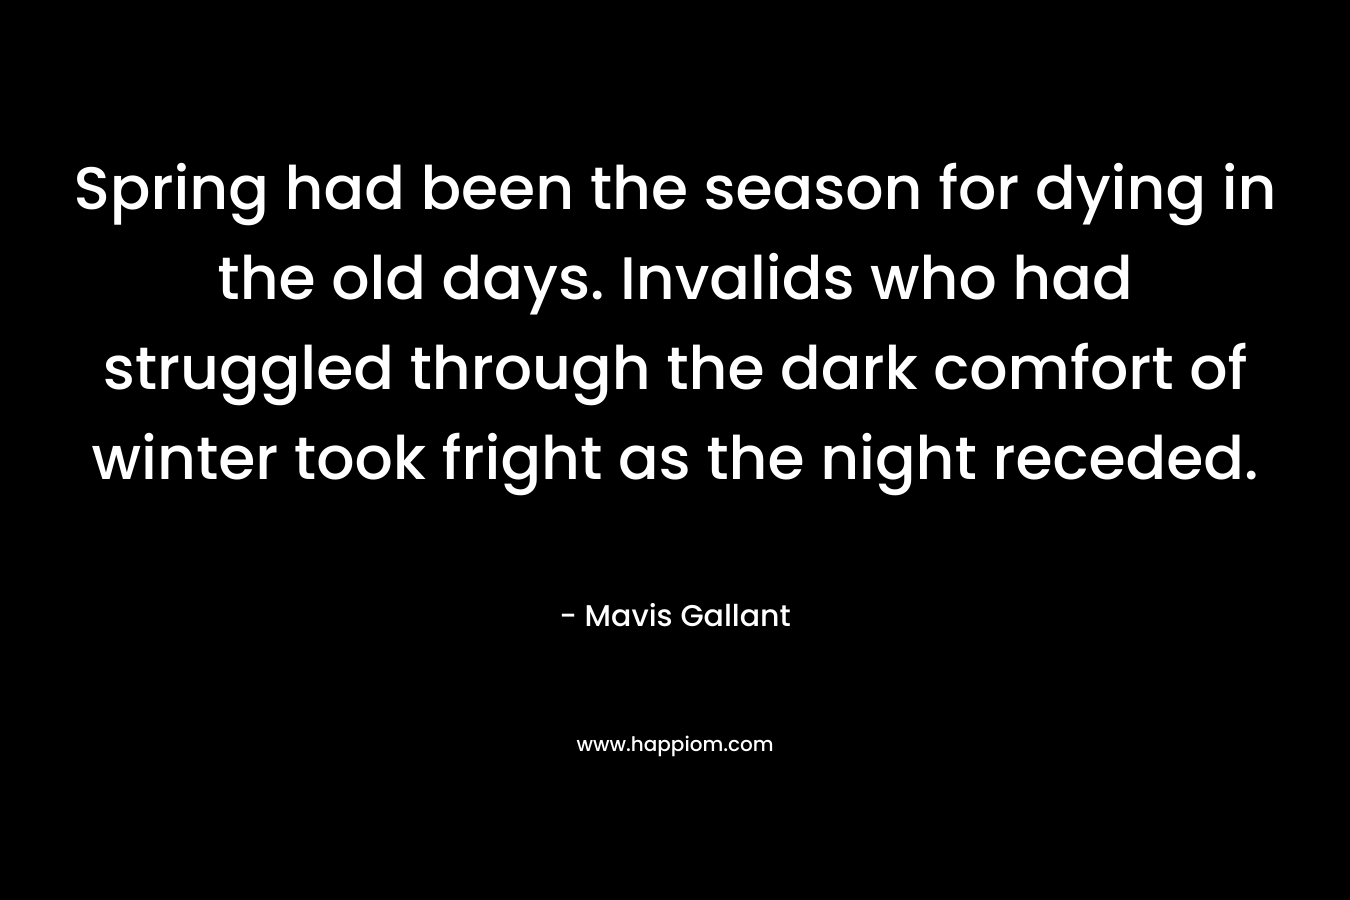 Spring had been the season for dying in the old days. Invalids who had struggled through the dark comfort of winter took fright as the night receded. – Mavis Gallant